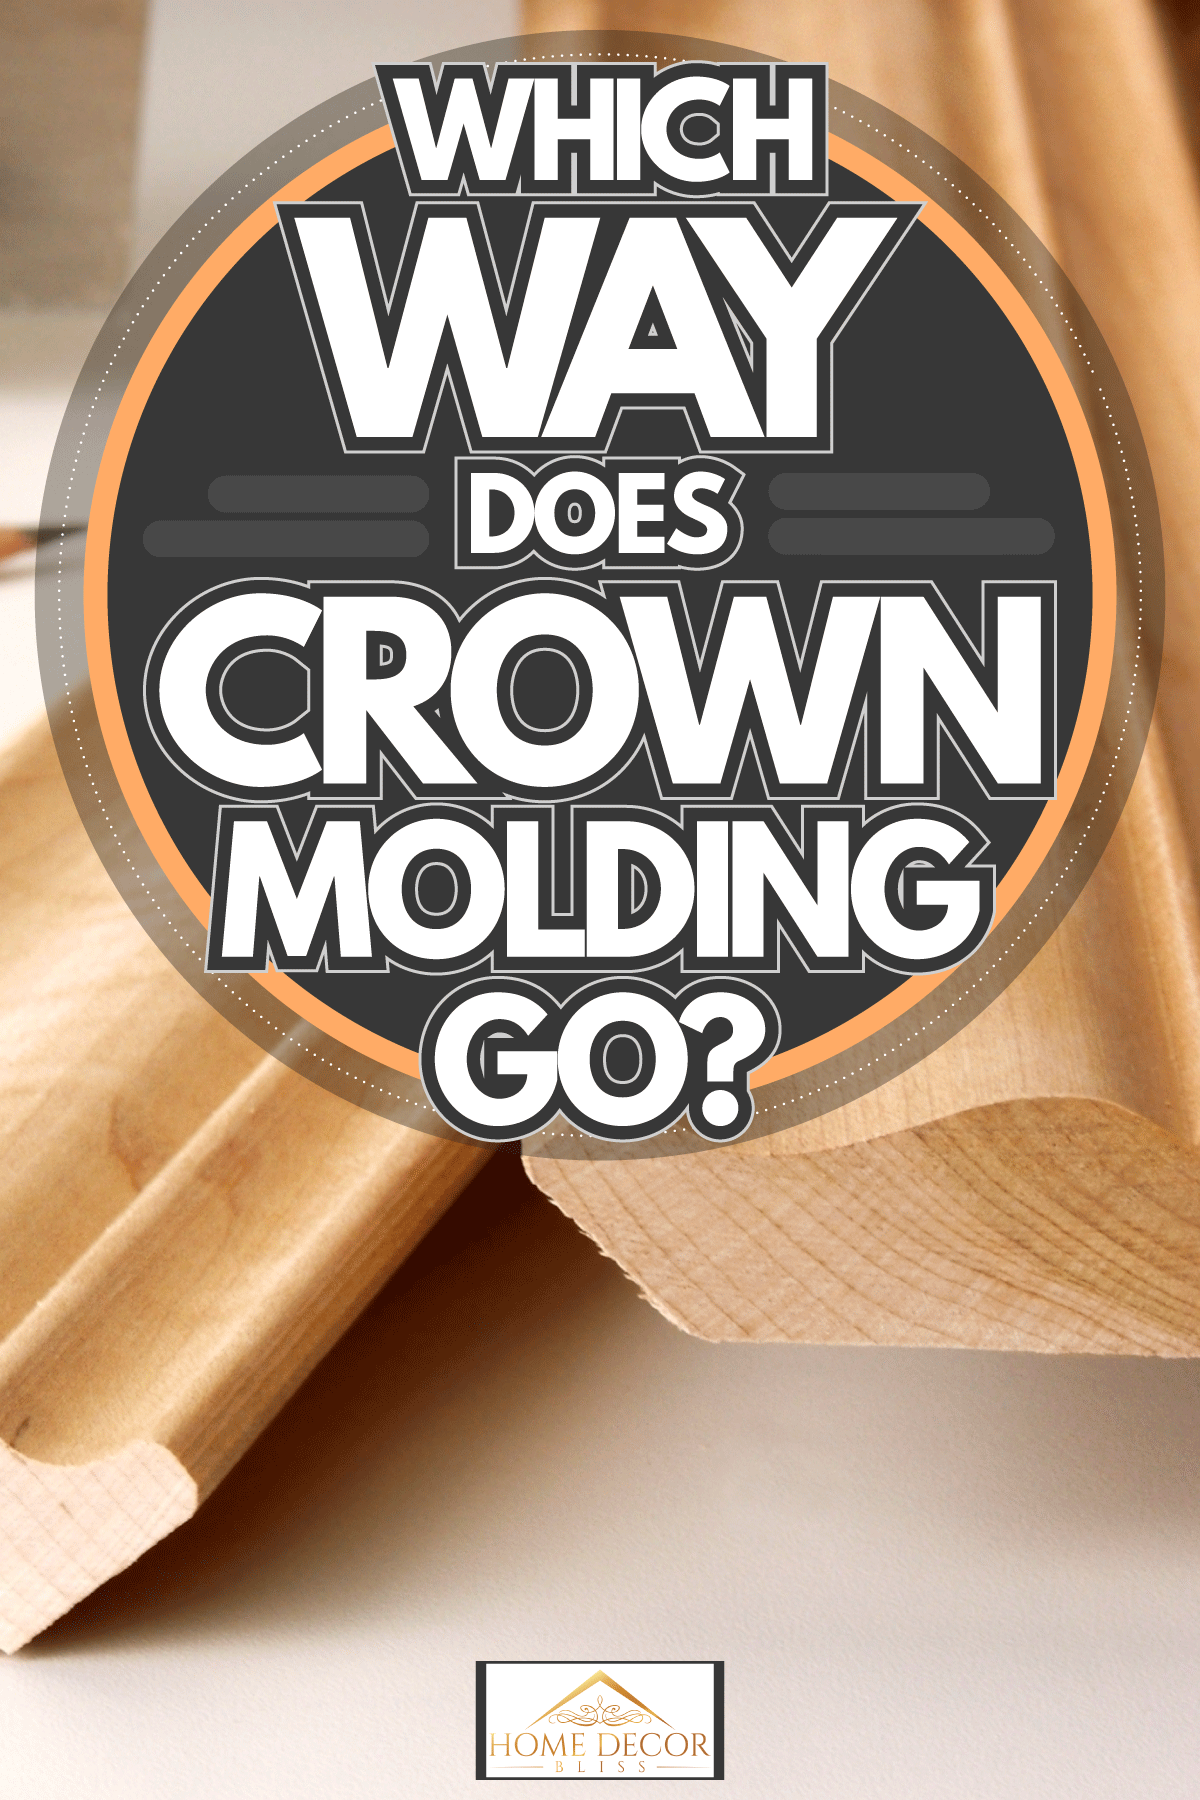 New fresh cut crown molding baseboard, Which Way Does Crown Molding Go?